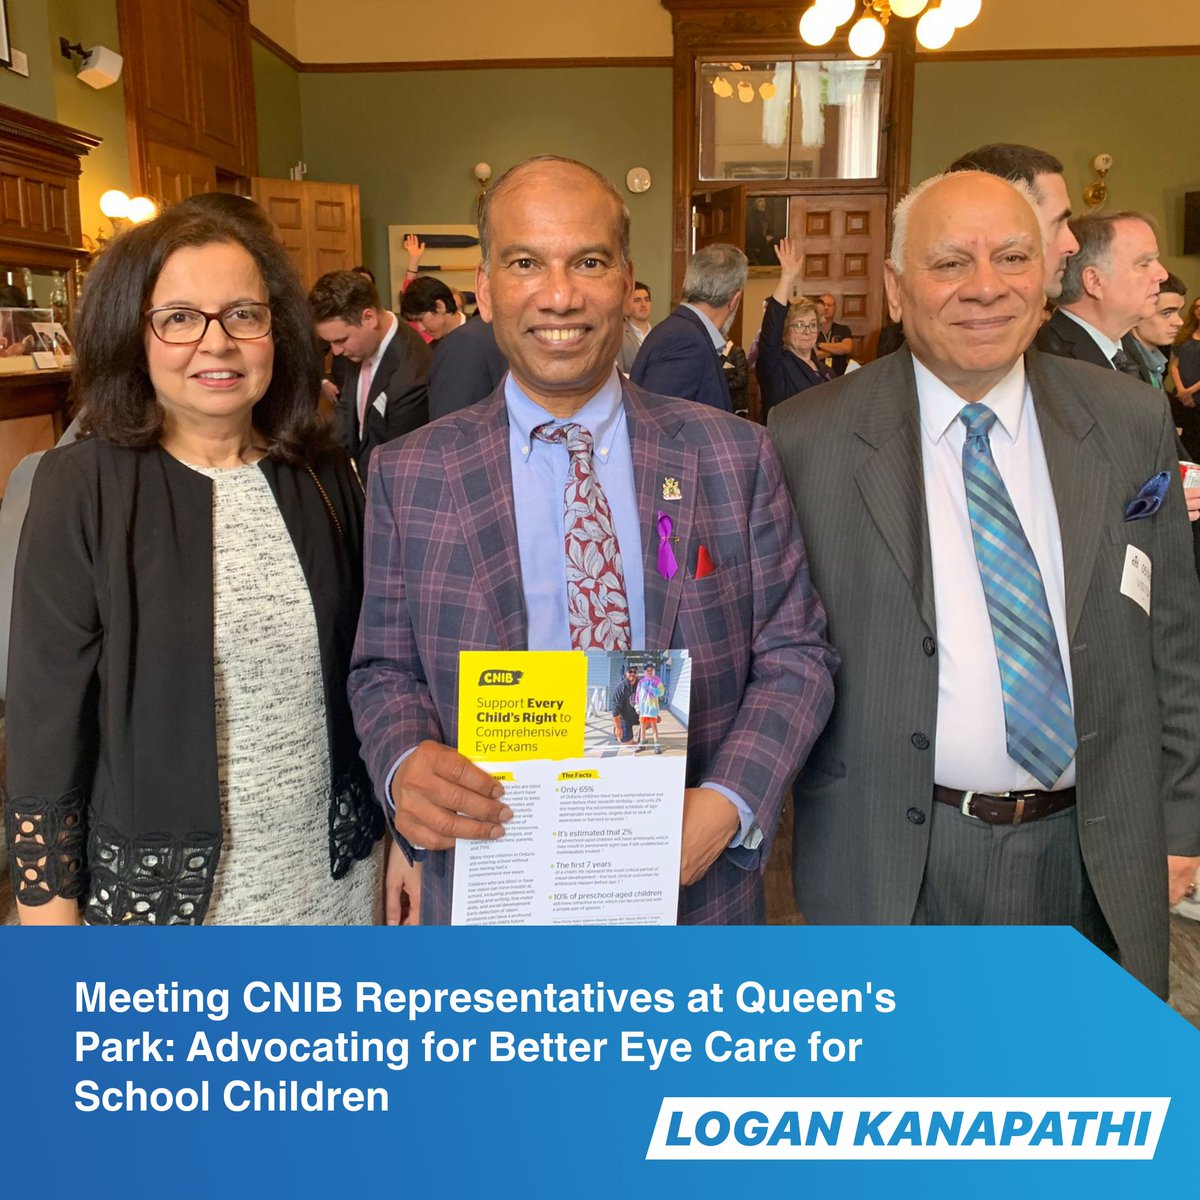 Had a chance to meet representatives from the Canadian National Institute for the Blind @CNIB when they came to Queen's Park for their Lobby Day. Very happy to hear their requests for more eye exam access for school children, and to thank them for coming to the Legislature!